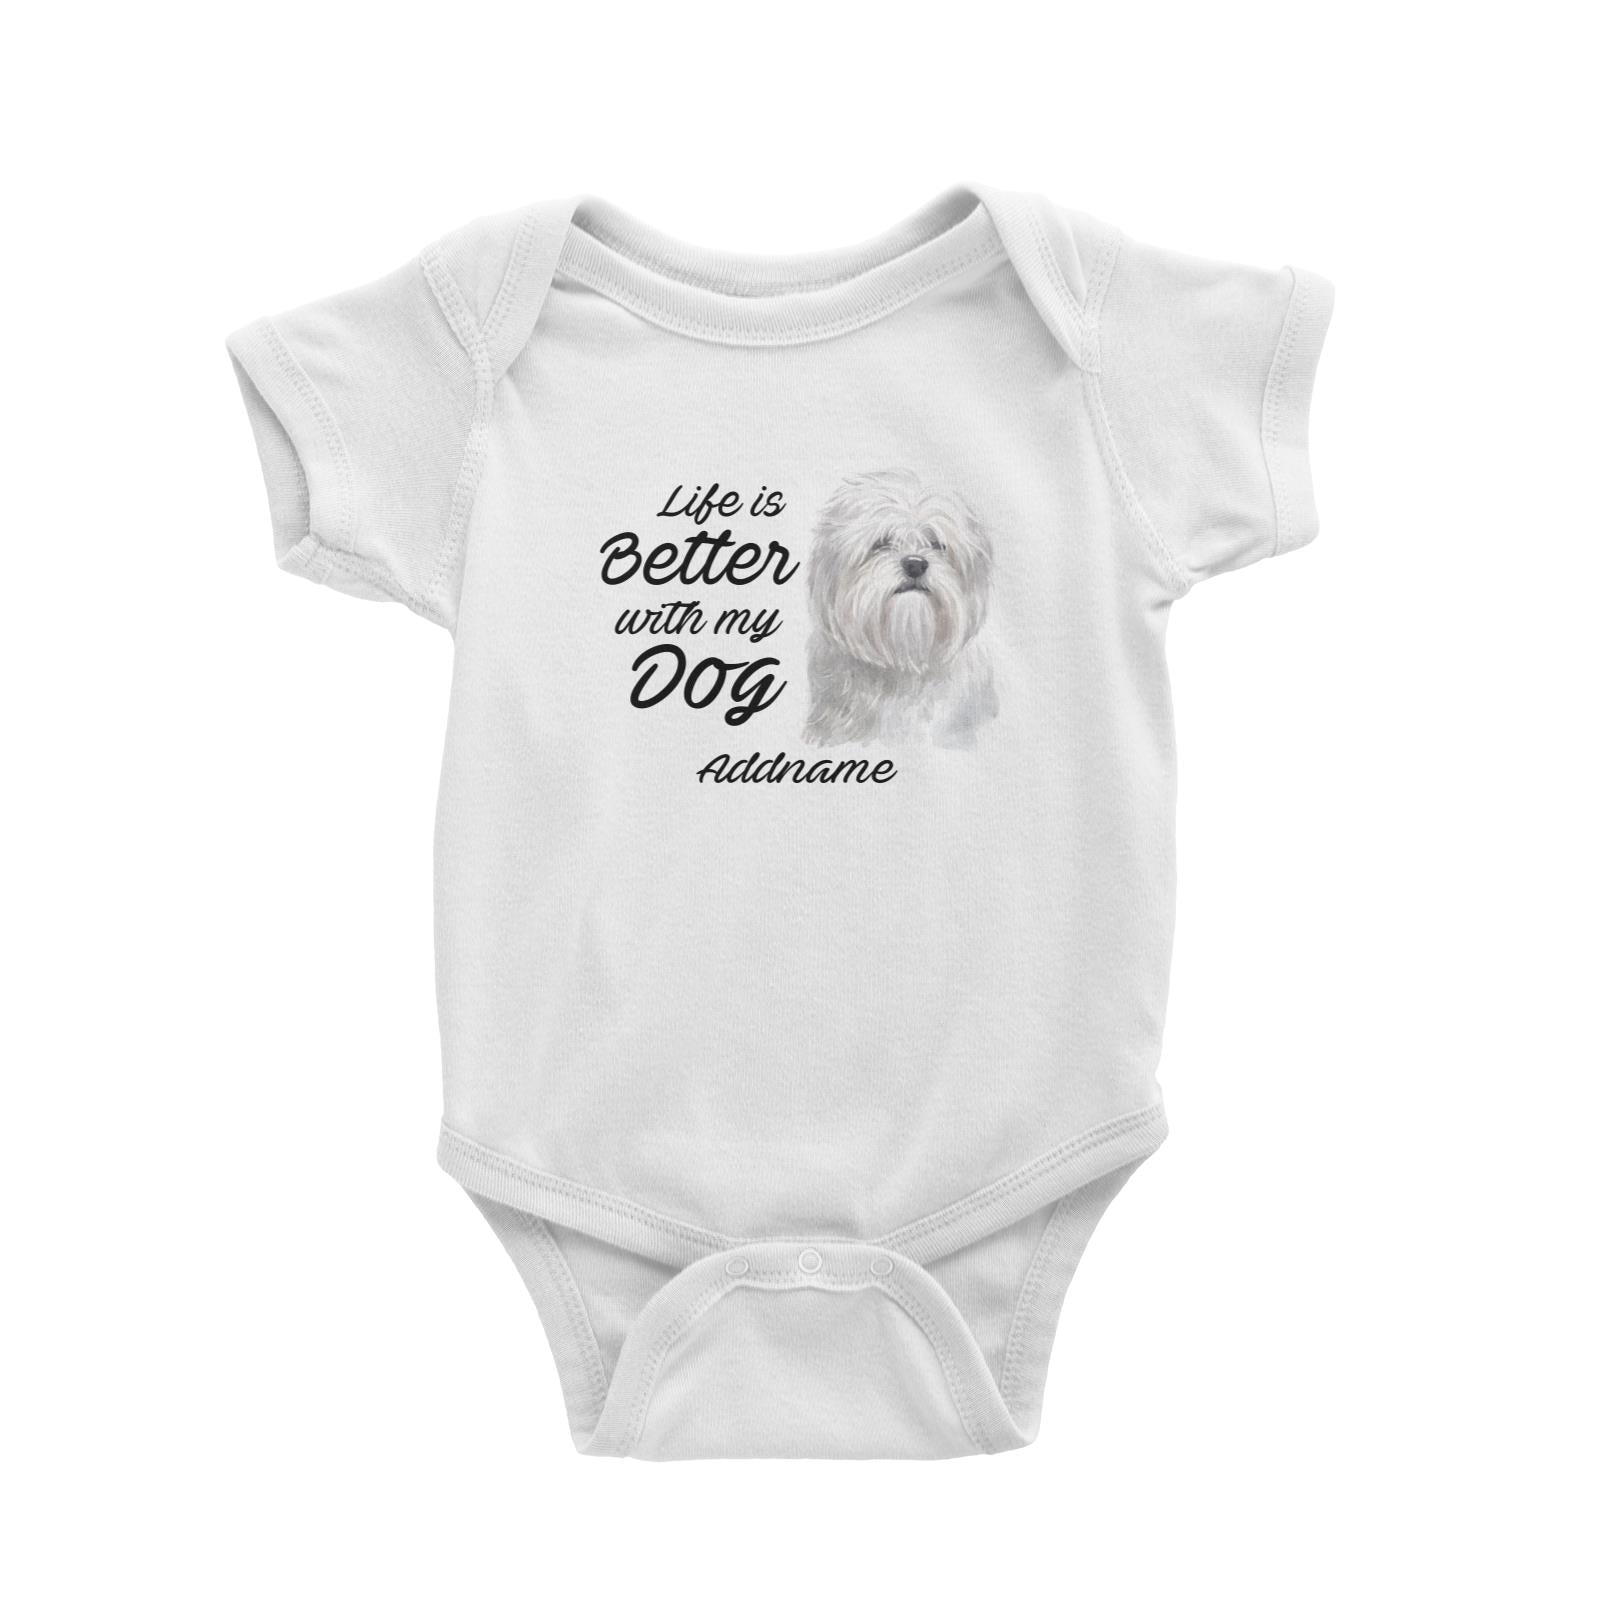 Watercolor Life is Better With My Dog Lhasa Apso Addname Baby Romper